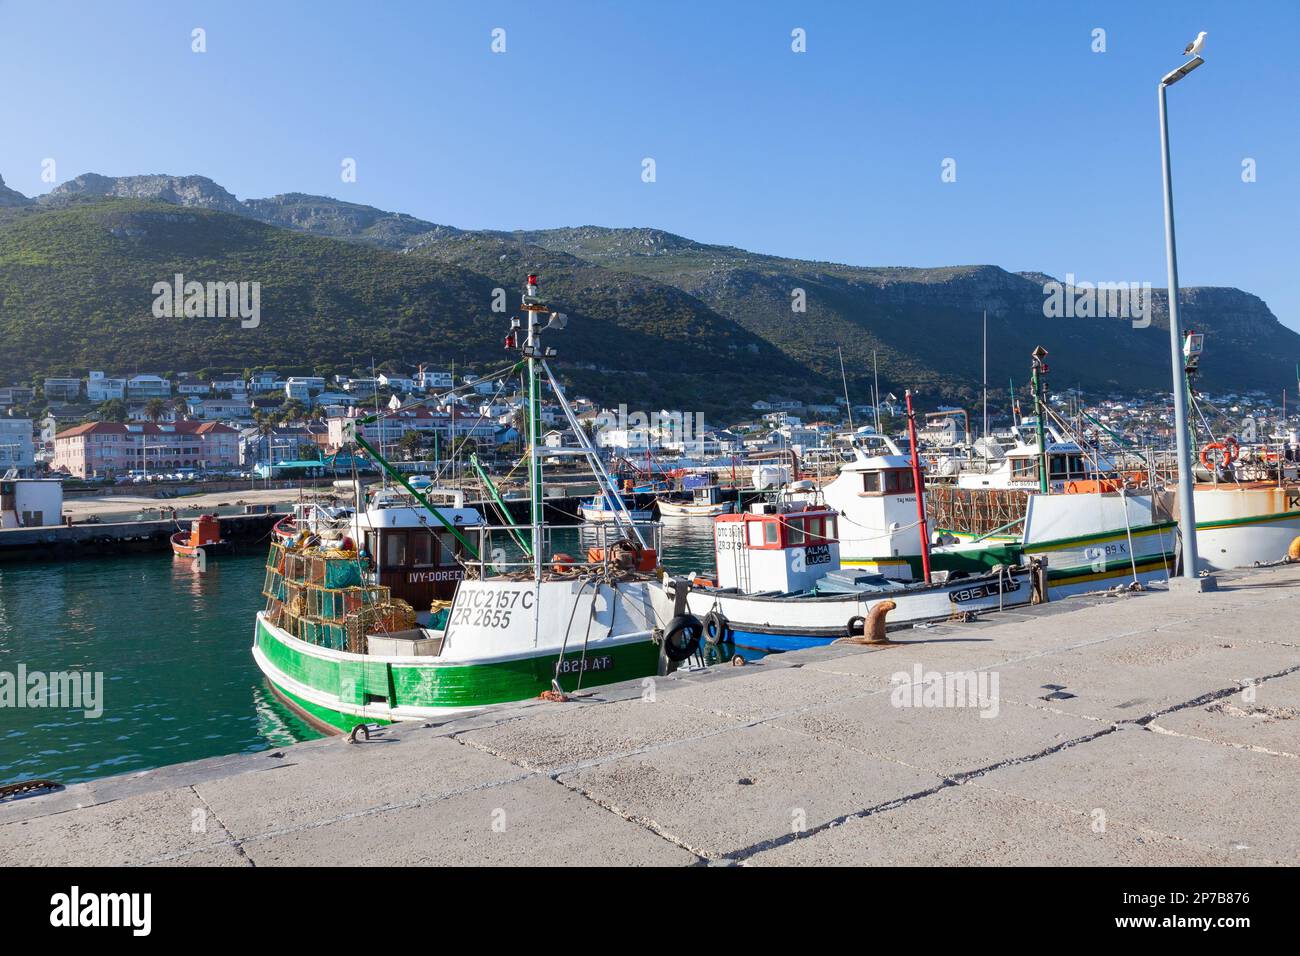 Fishing boats moored in Kalk Bay Harbour, Cape Town, Western Cape, South Africa at sunset with a view to the houses in Kalk Bay neyond Stock Photo